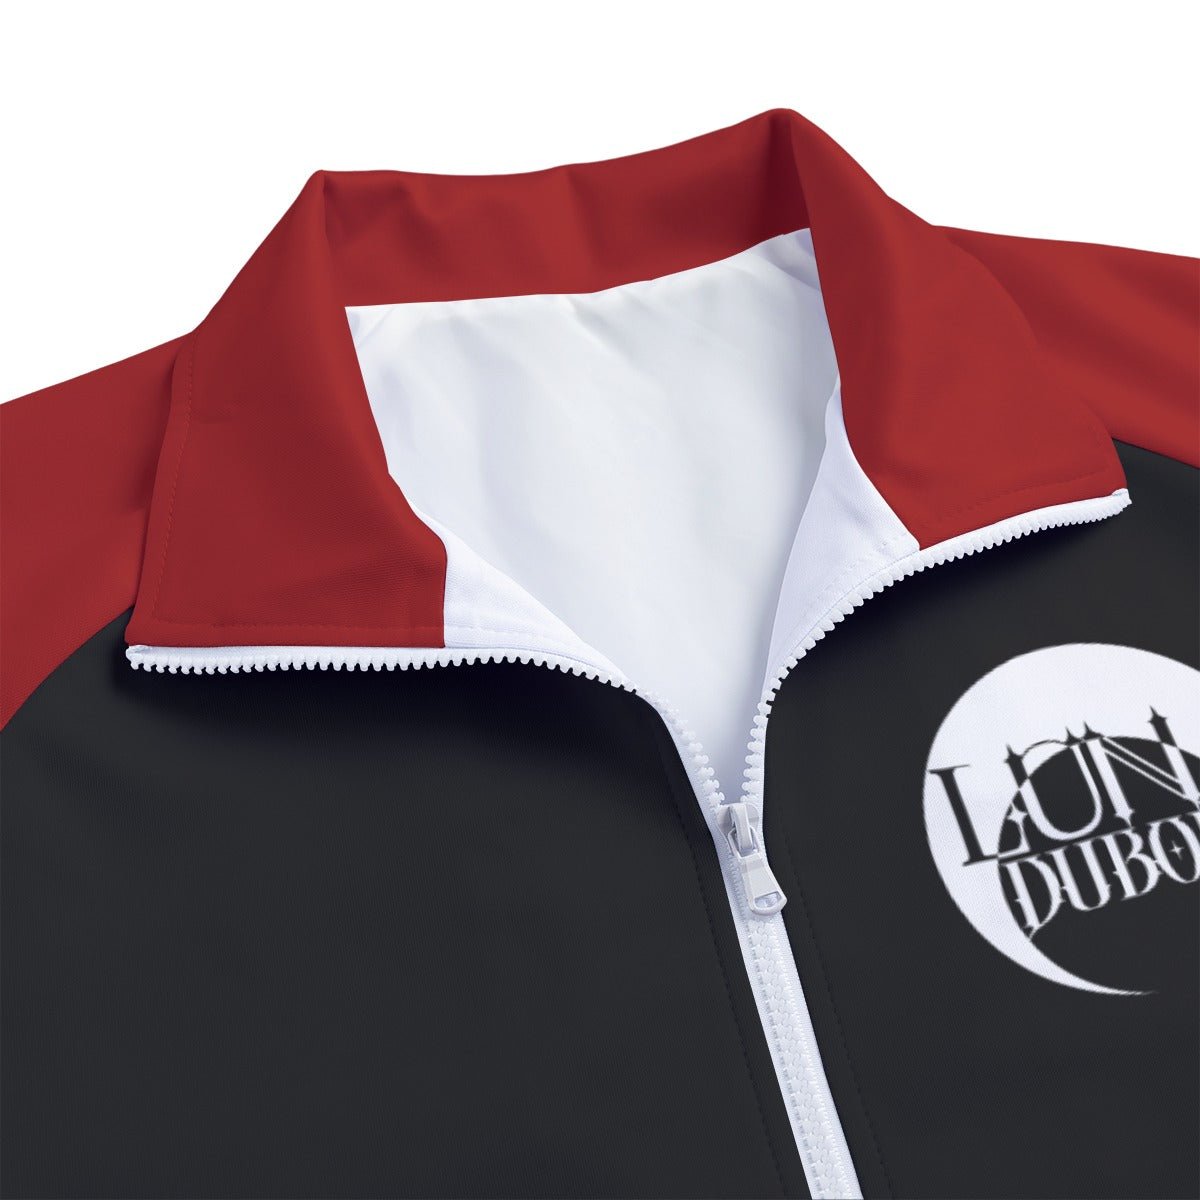 Luna Dubois - Goddess of the Moon Stand Collar Jacket - dragqueenmerch